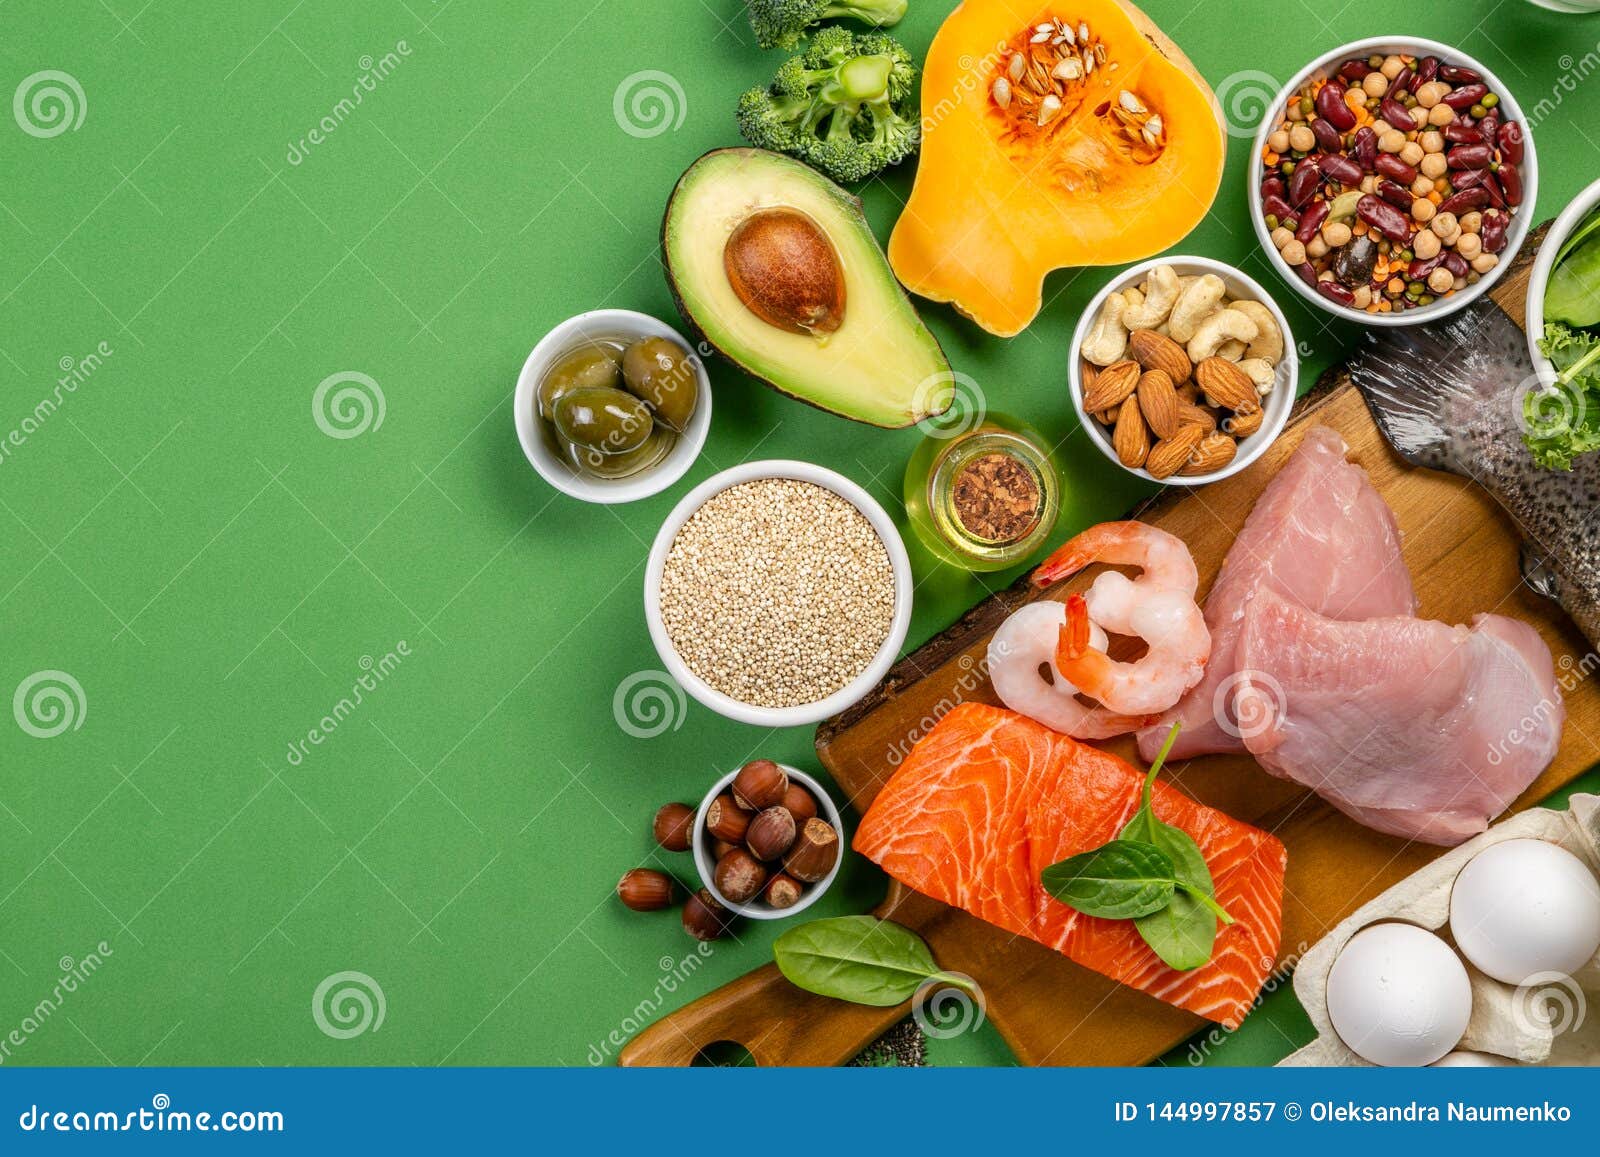 Mediterranean Diet Concept - Meat, Fish, Fruits and Vegetables Stock ...